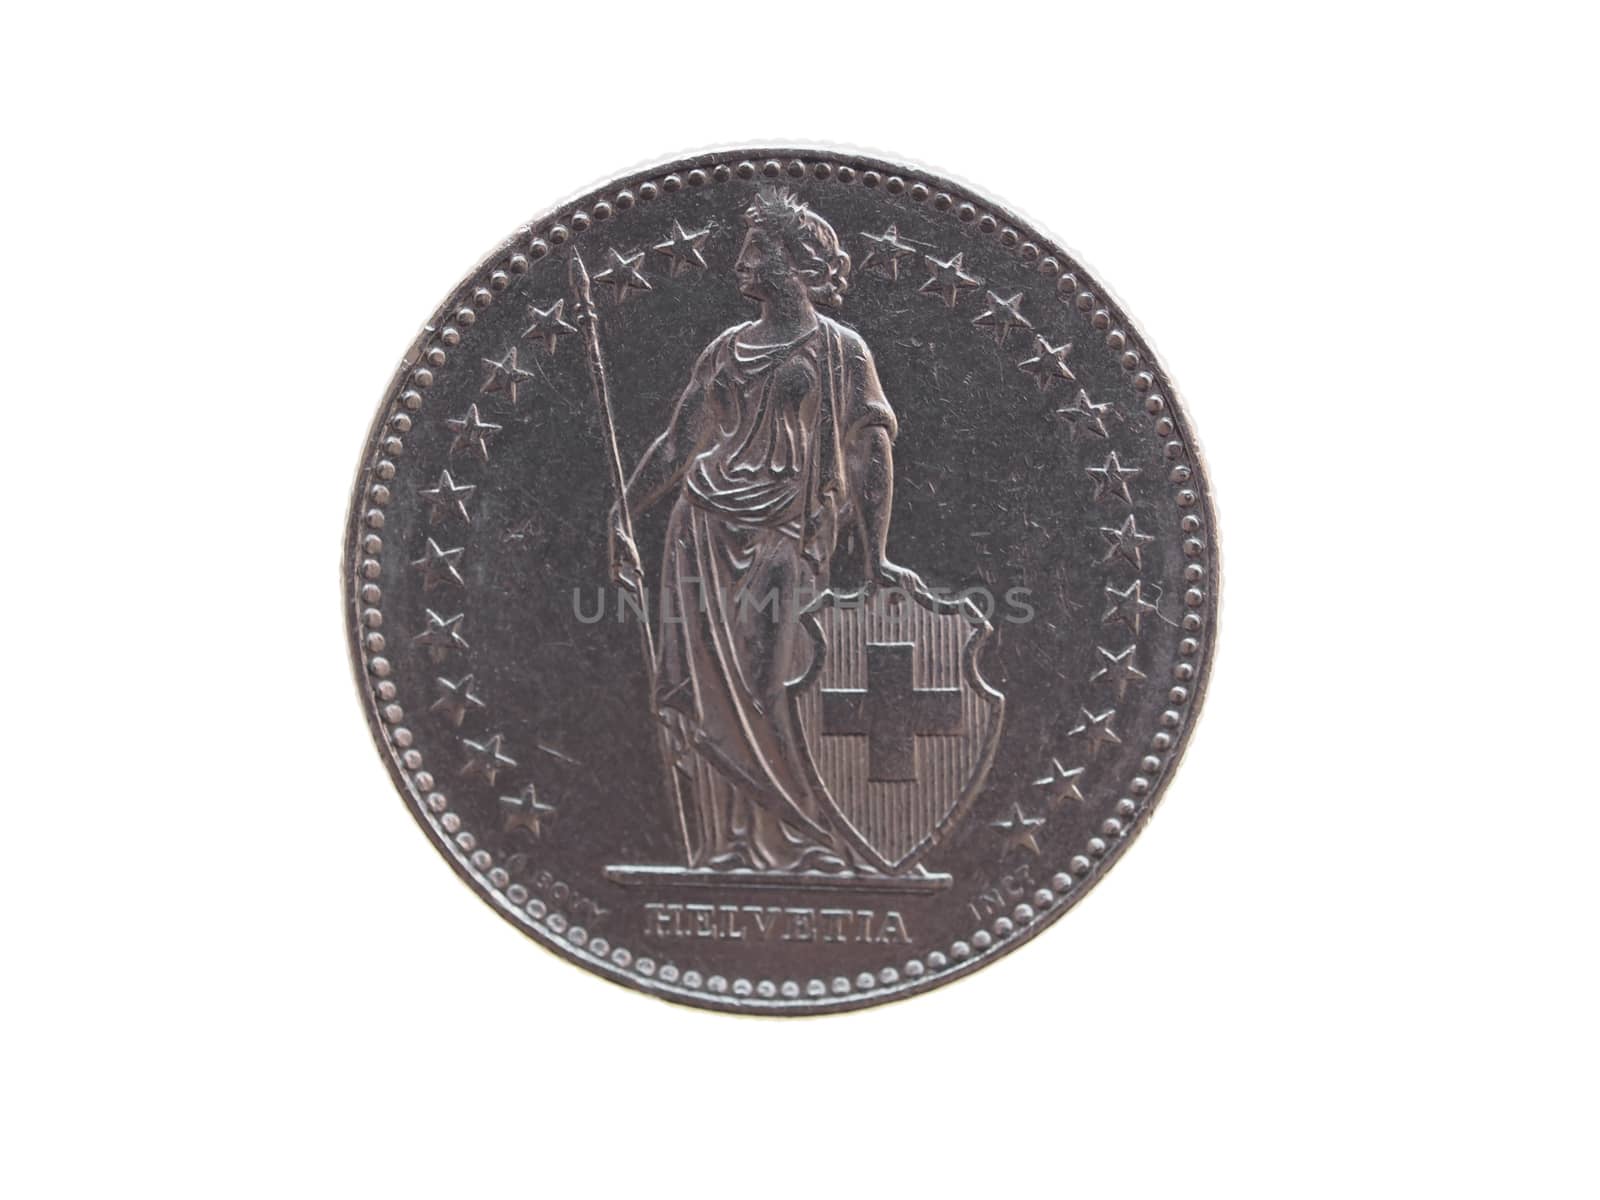 Swiss franc CHF (legal tender of Switzerland - Confederation Helvetique) coin